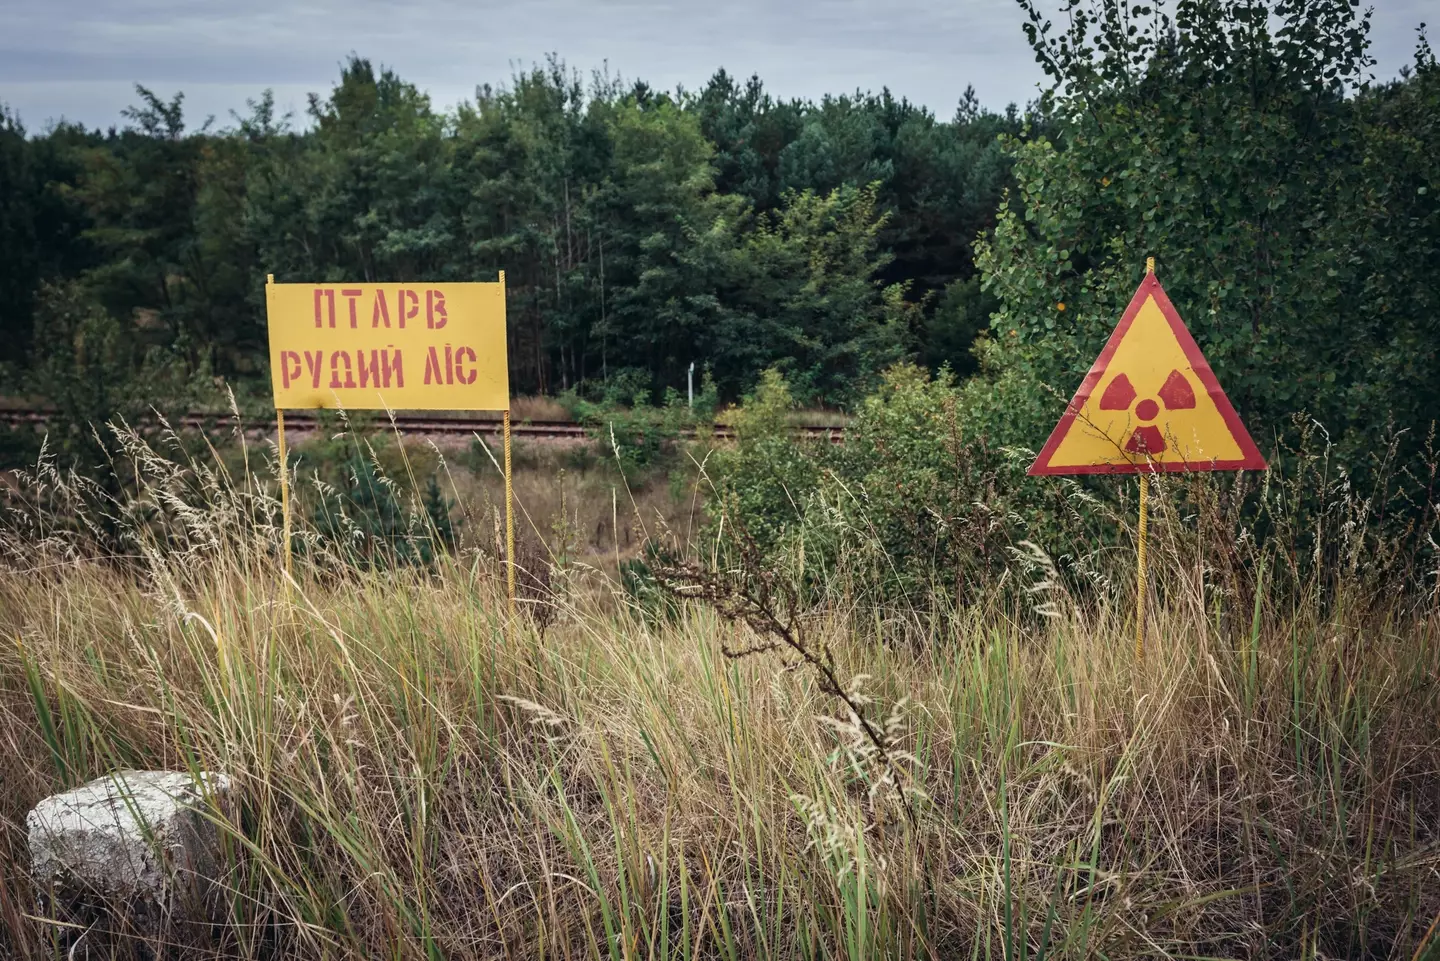 Warning signs outside the red forest.